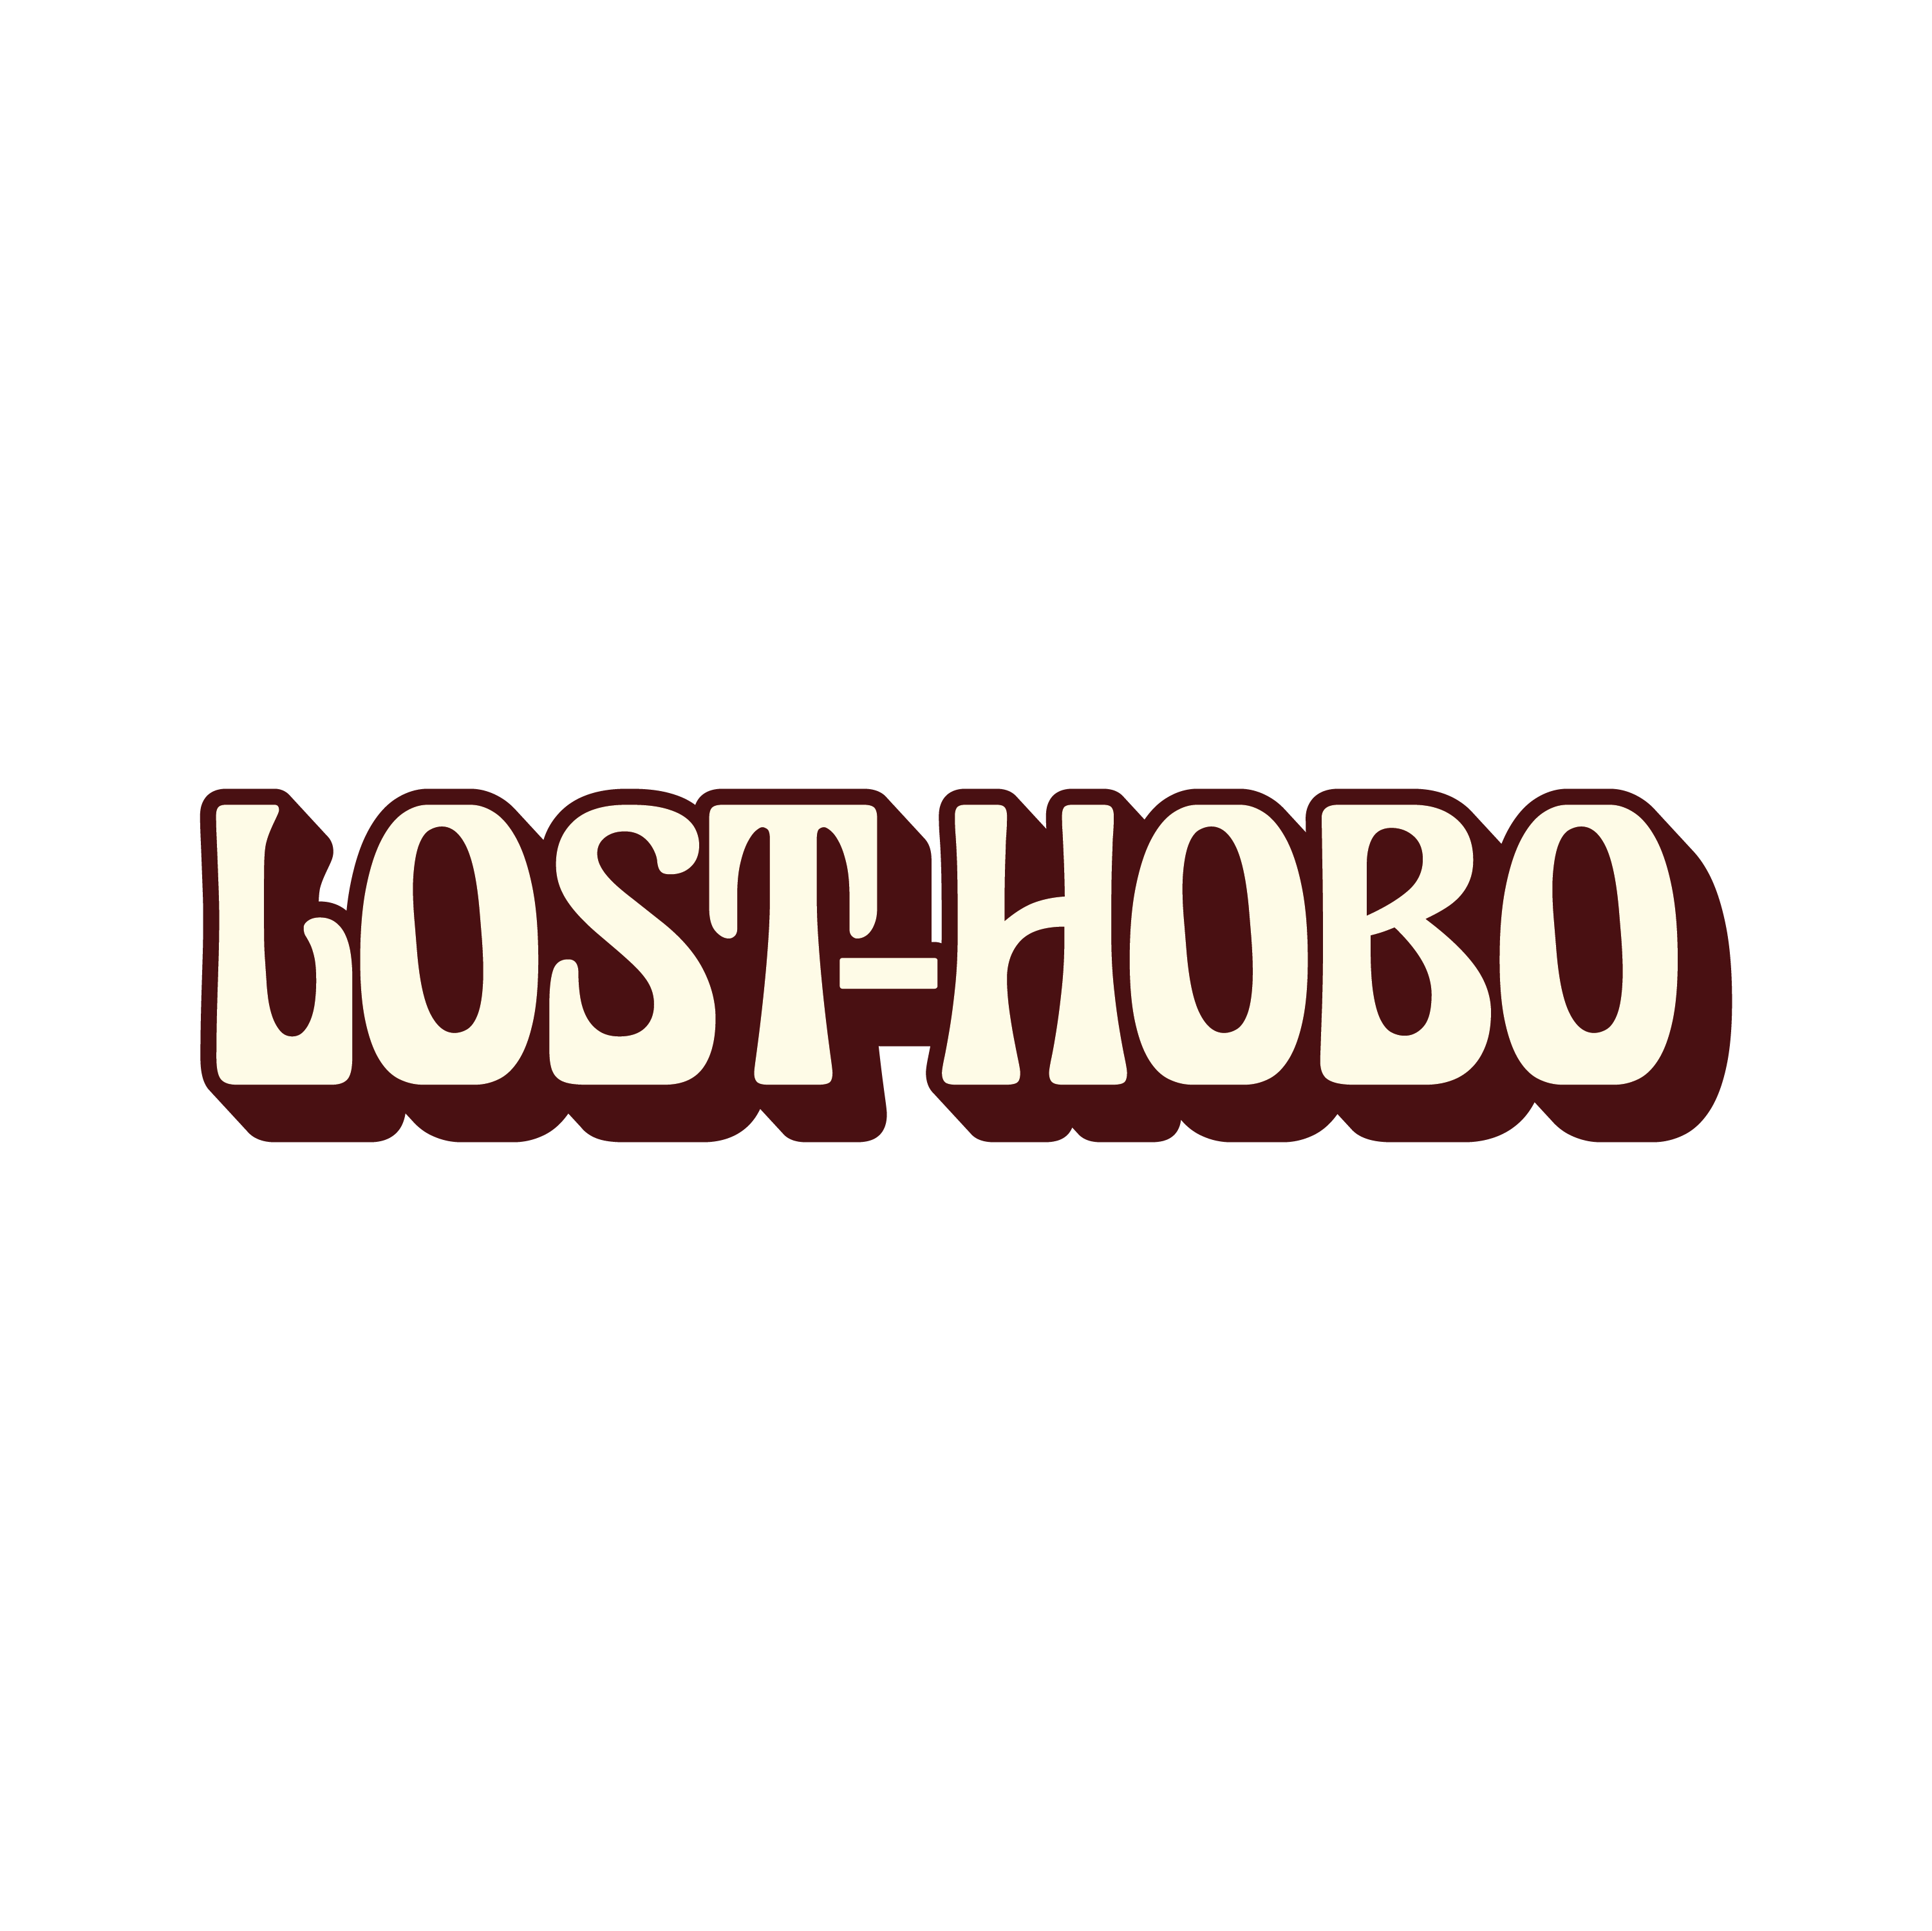 LOST HOBO CLOTHING– Lost